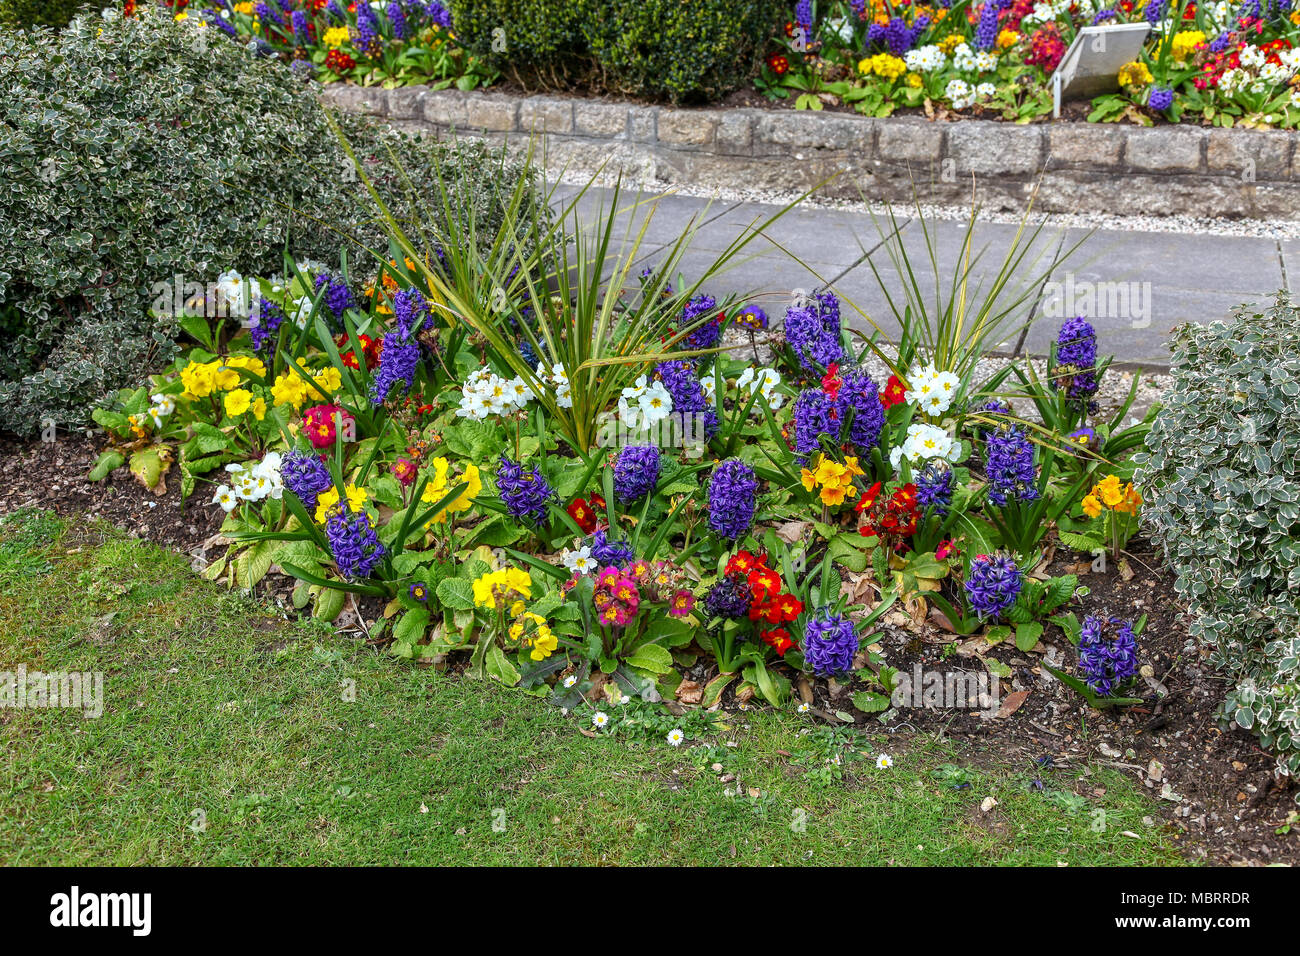 A colourful display of spring flowers including blue/purple Hyacinths (), and various different coloured Primulars Stock Photo